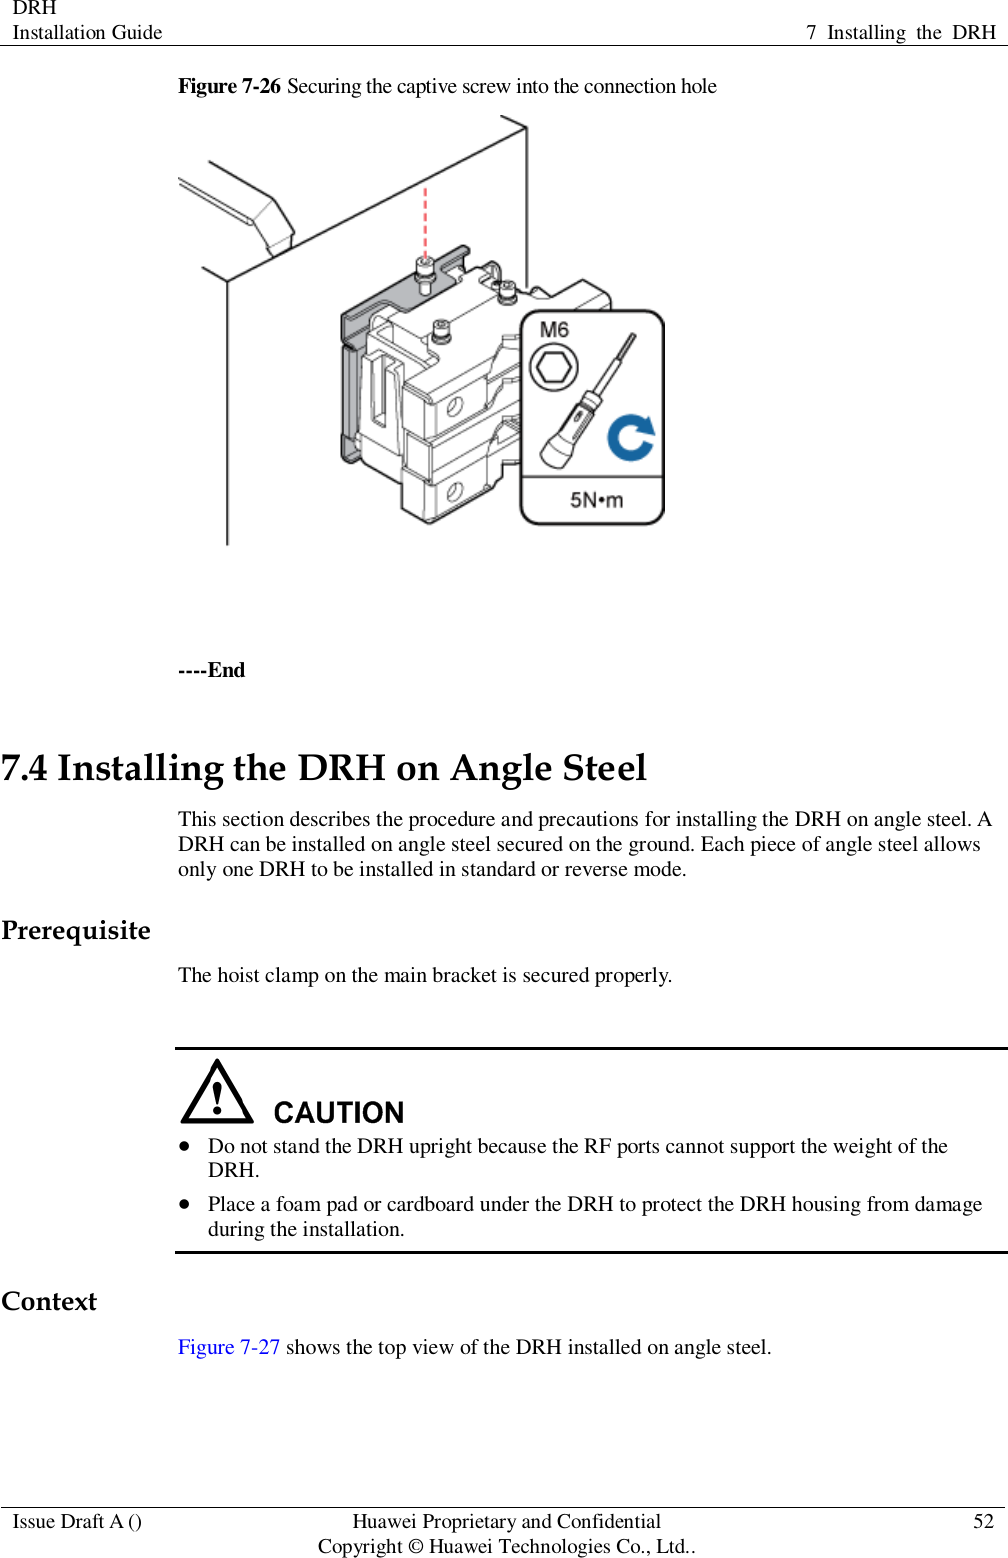 DRH   Installation Guide 7  Installing  the  DRH  Issue Draft A () Huawei Proprietary and Confidential                                     Copyright © Huawei Technologies Co., Ltd.. 52  Figure 7-26 Securing the captive screw into the connection hole   ----End 7.4 Installing the DRH on Angle Steel This section describes the procedure and precautions for installing the DRH on angle steel. A DRH can be installed on angle steel secured on the ground. Each piece of angle steel allows only one DRH to be installed in standard or reverse mode. Prerequisite The hoist clamp on the main bracket is secured properly.    Do not stand the DRH upright because the RF ports cannot support the weight of the DRH.  Place a foam pad or cardboard under the DRH to protect the DRH housing from damage during the installation. Context Figure 7-27 shows the top view of the DRH installed on angle steel. 